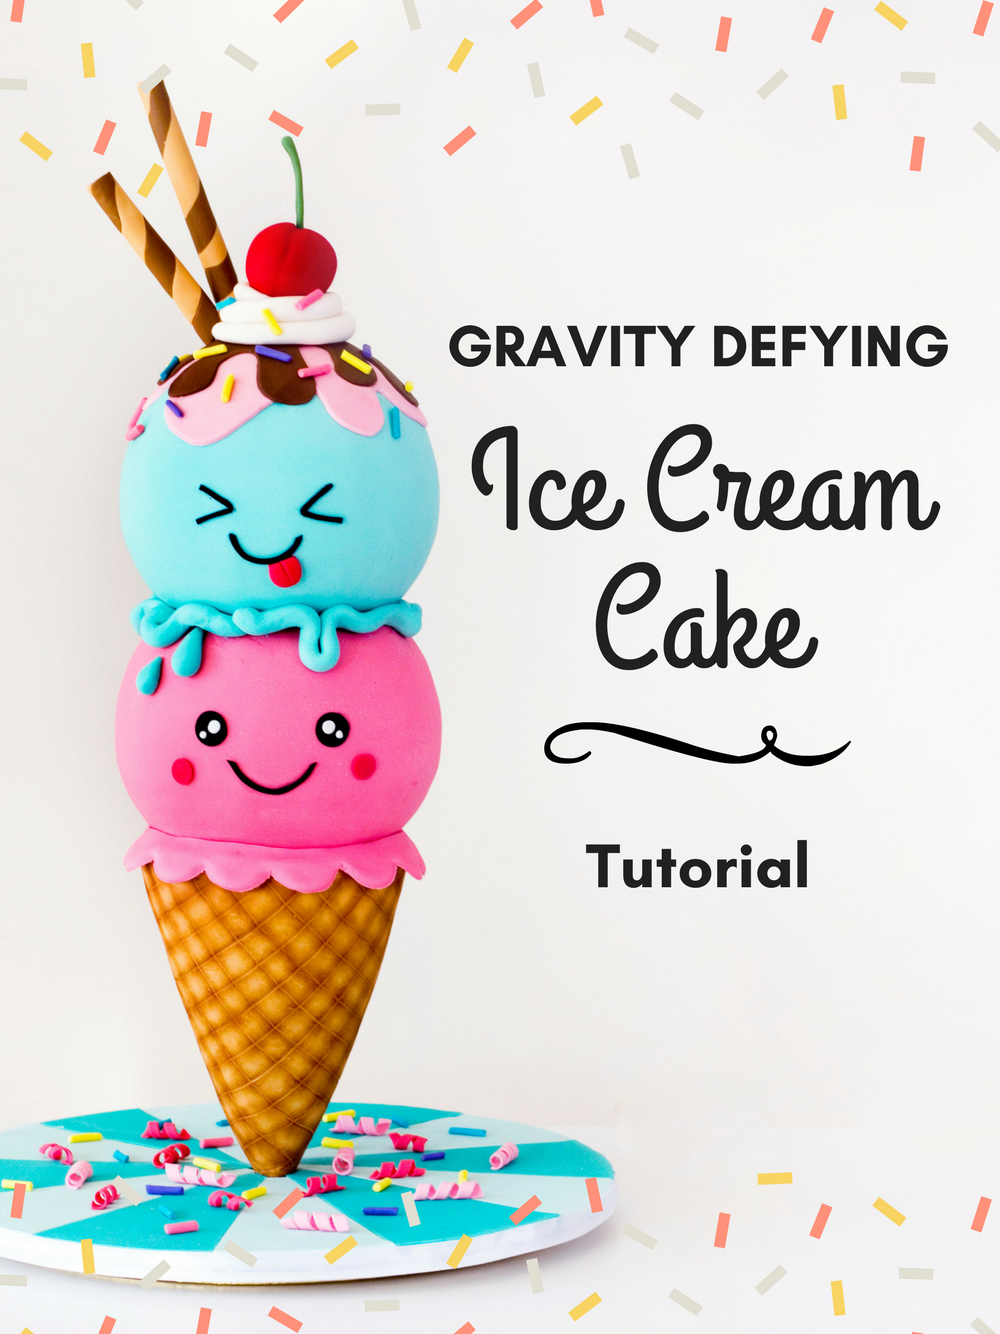 ice cream and cake games download the last version for windows